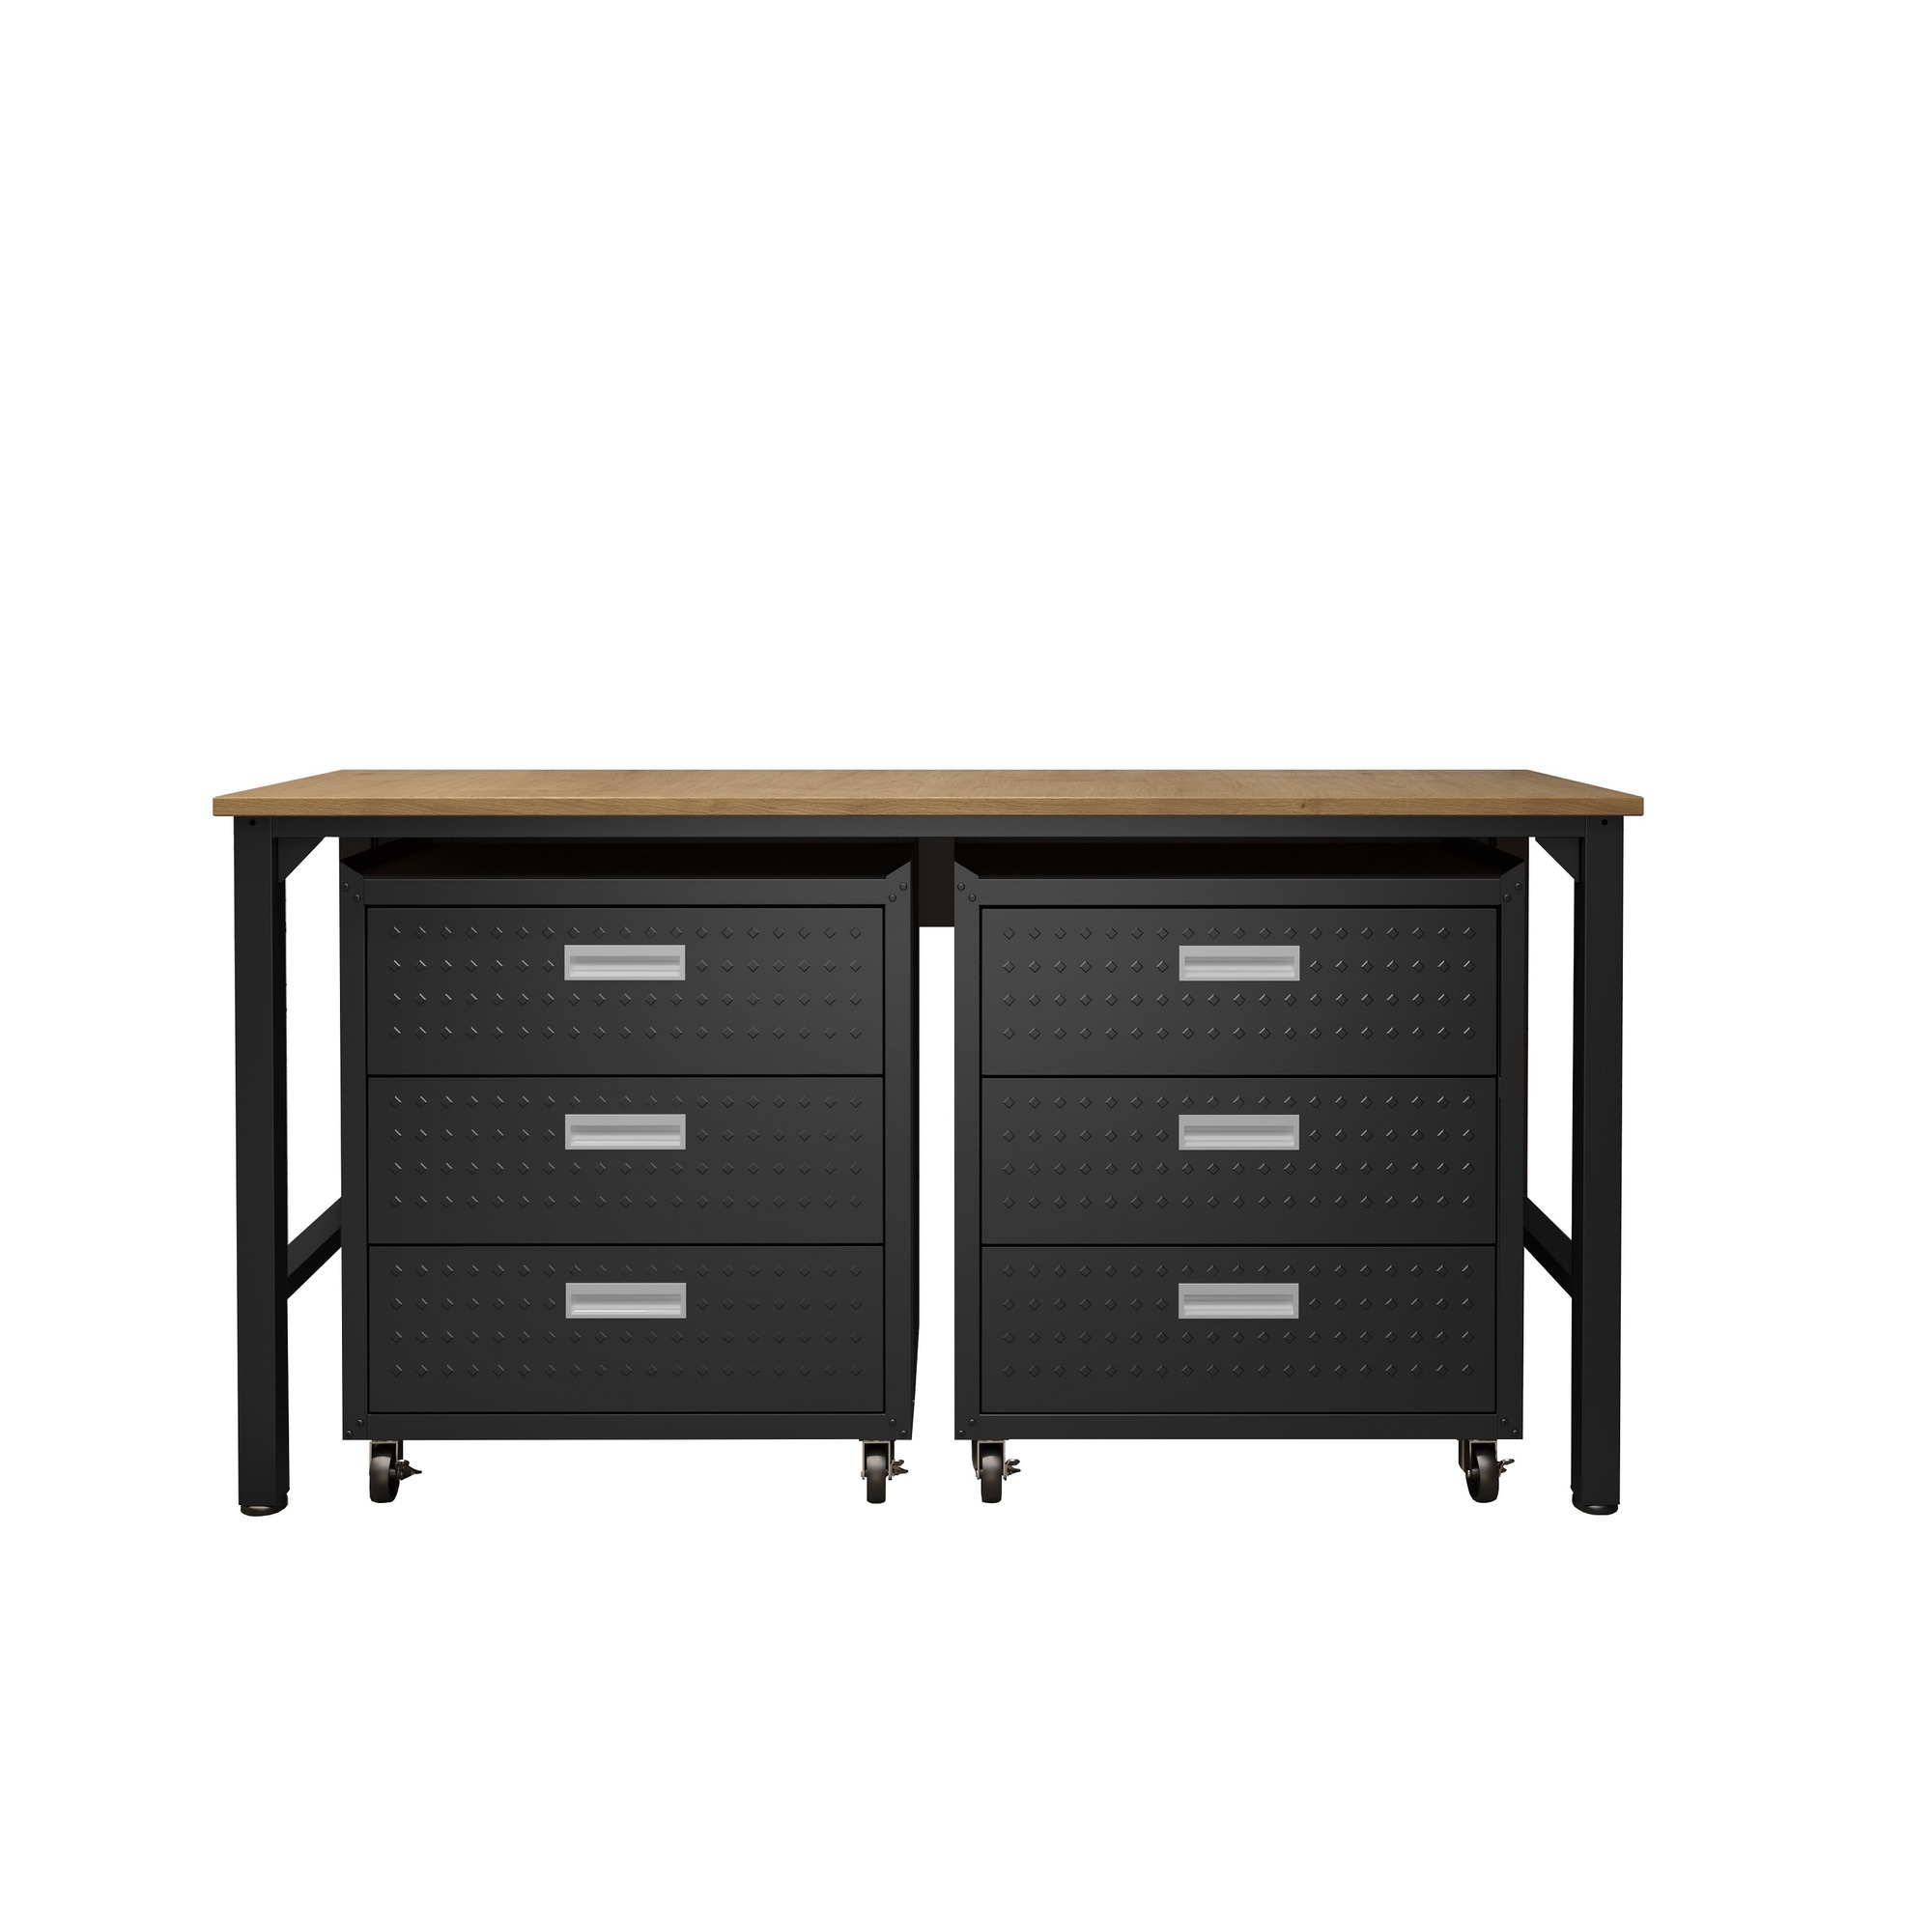 Manhattan Comfort, 3 Pc Fortress Mobile Garage Cabinet Set Charcoal, Width 72.4 in, Height 37.6 in, Depth 20.5 in, Model 19GMC